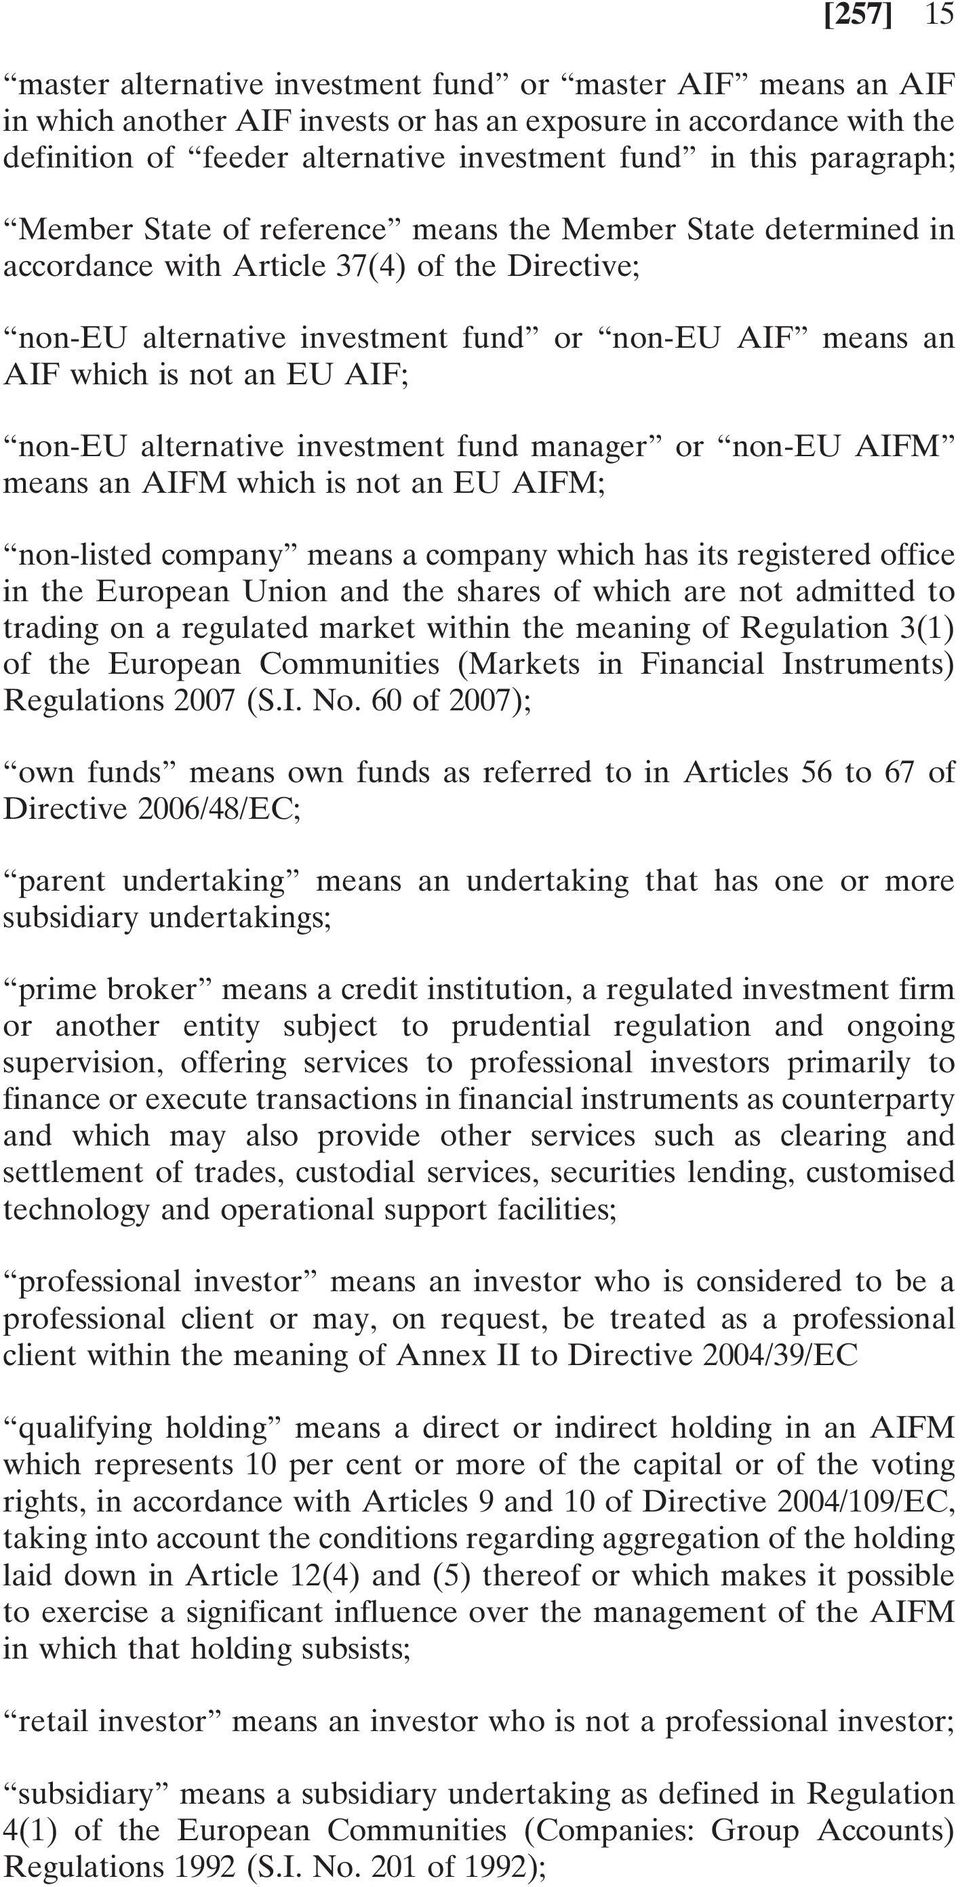 EU AIF; non-eu alternative investment fund manager or non-eu AIFM means an AIFM which is not an EU AIFM; non-listed company means a company which has its registered office in the European Union and